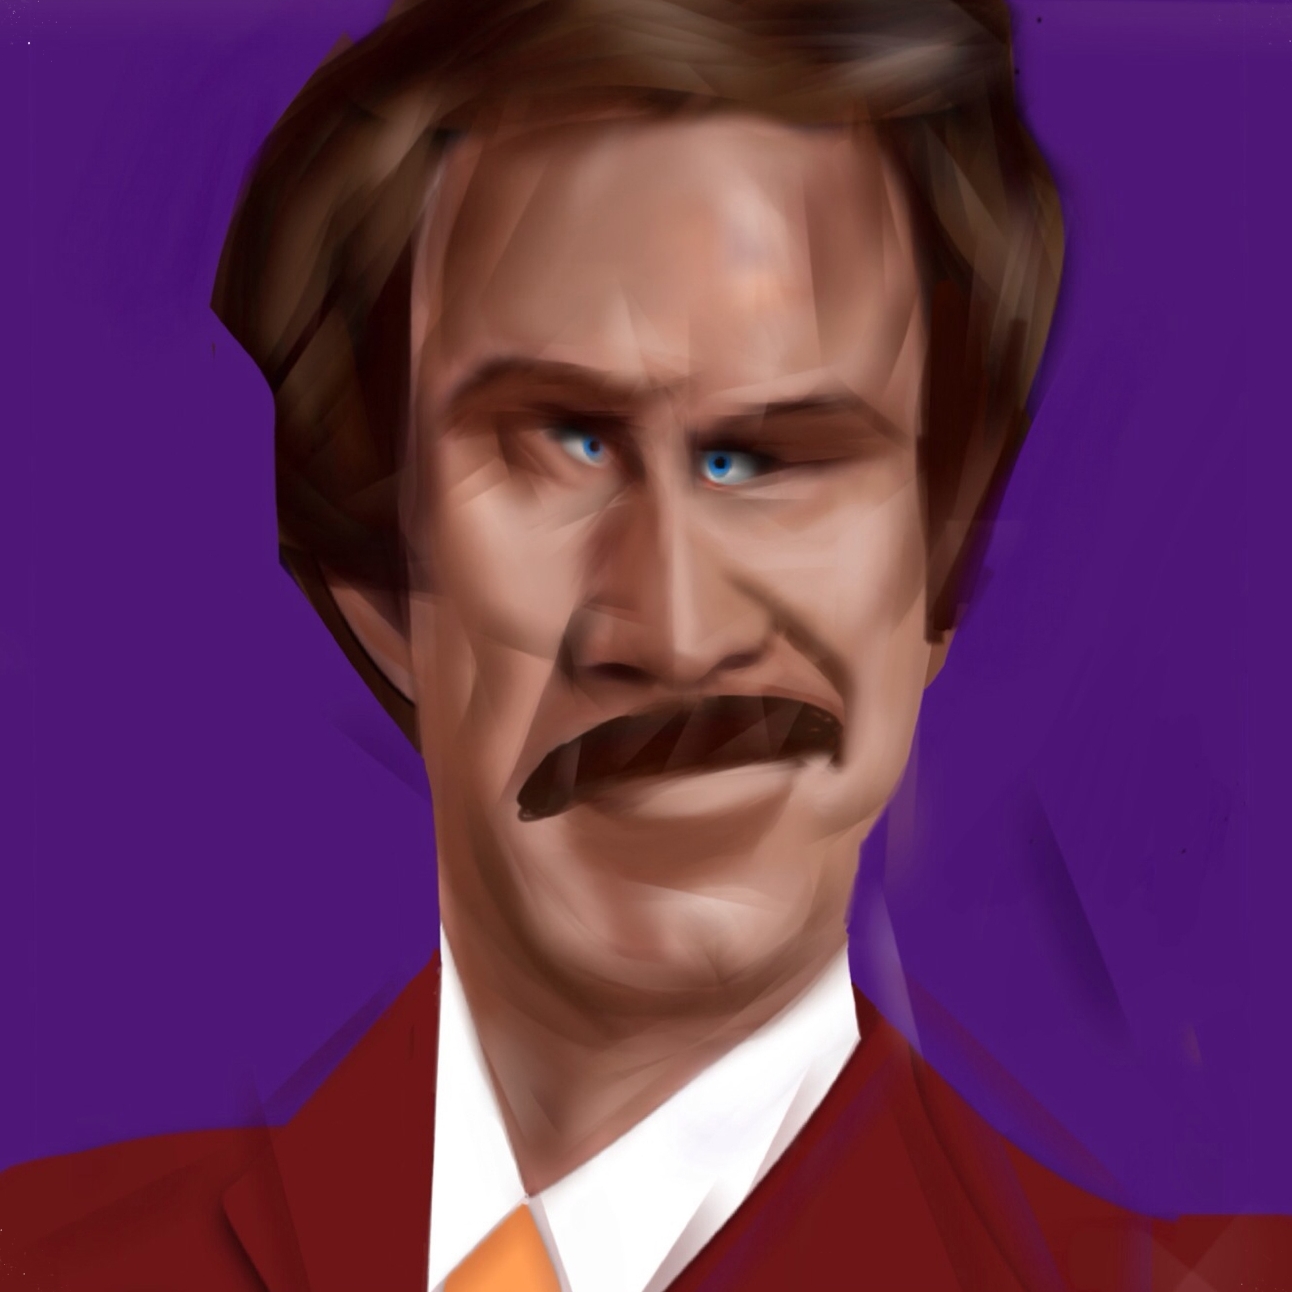  Will Ferrel, "Ron Burgundy"   'He had a voice that could make a wolverine purr and suits so fine they made Sinatra look like a hobo. In other words, Ron Burgundy was the balls.'     